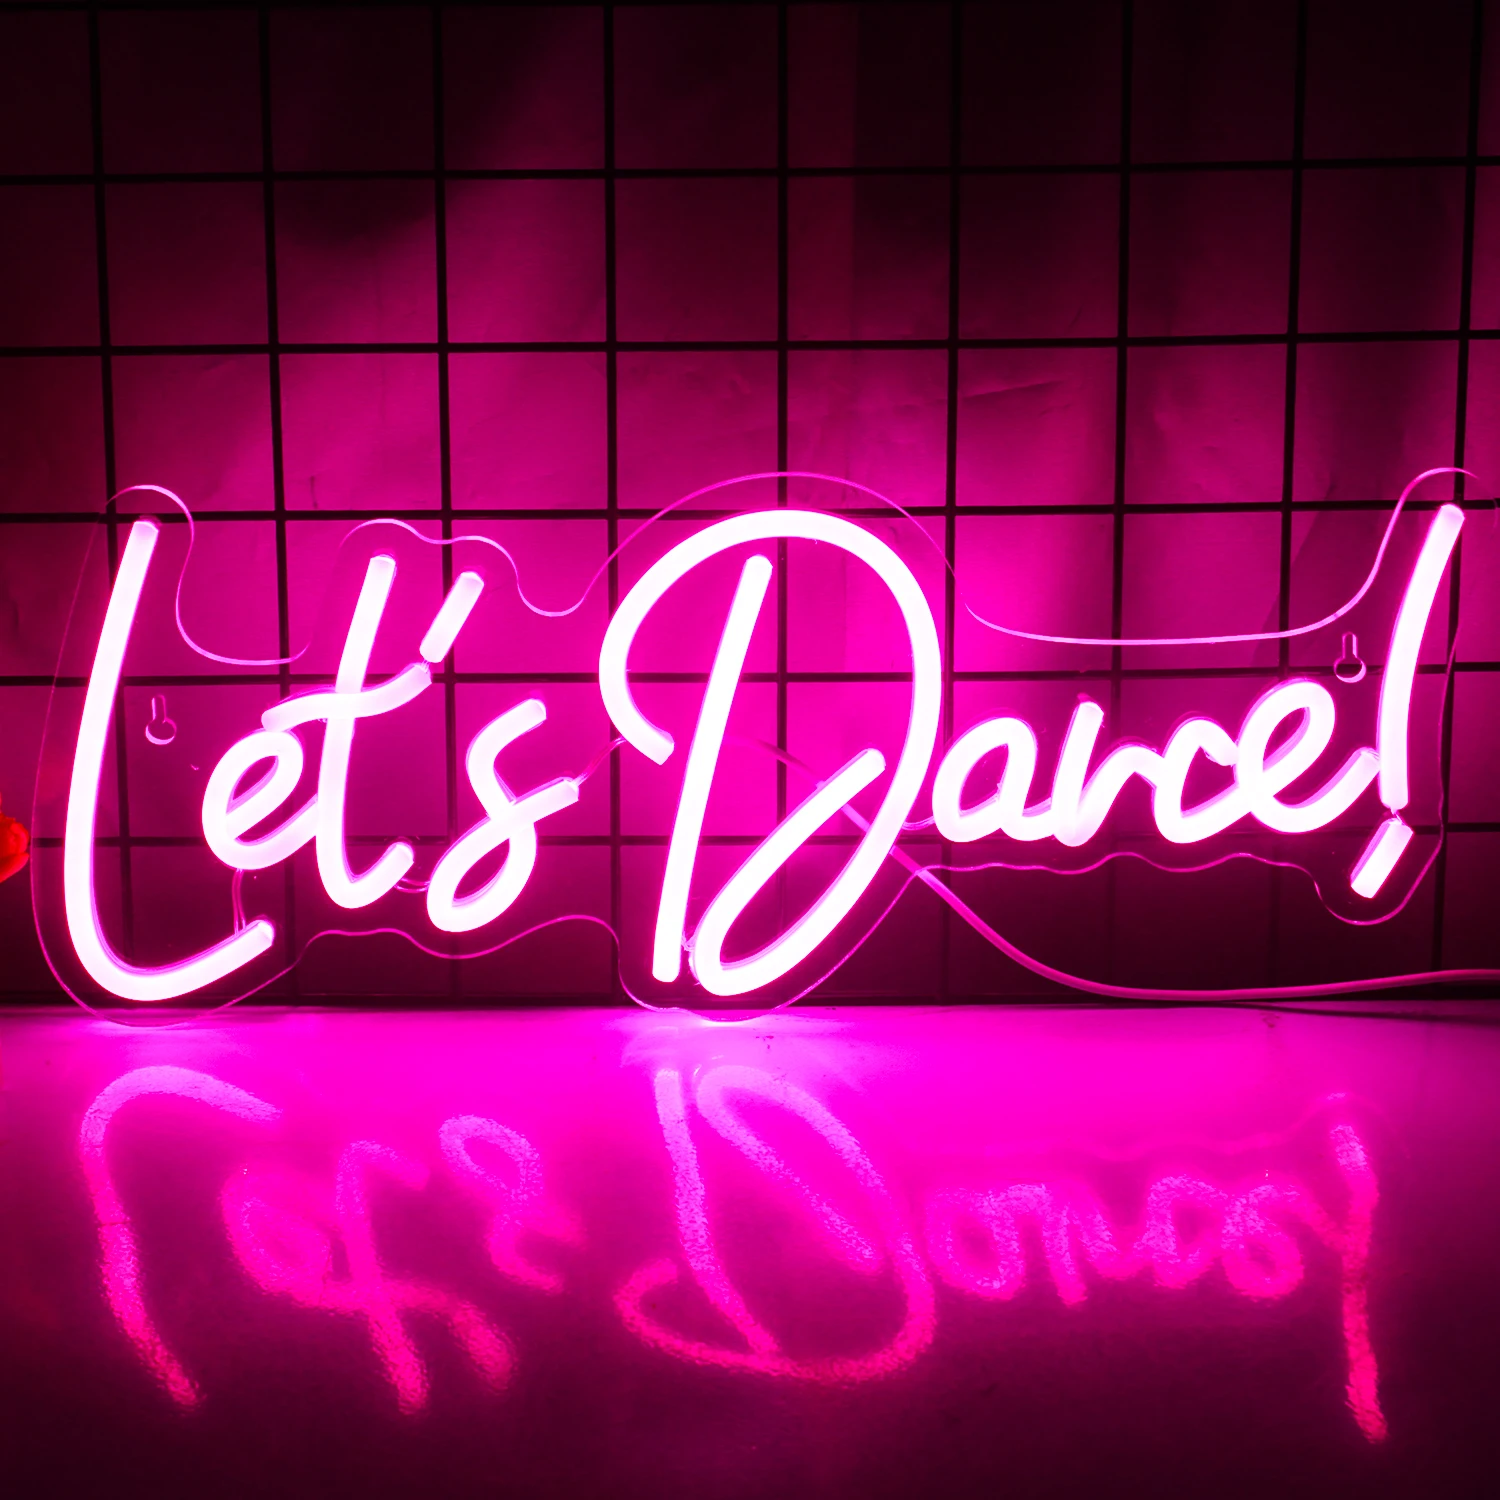 Let's Dance Neon Signs Dance Led Sign USB Powered Switch for Wedding Party Bar Valentines' Day Birthday Dancing Party Wall Decor